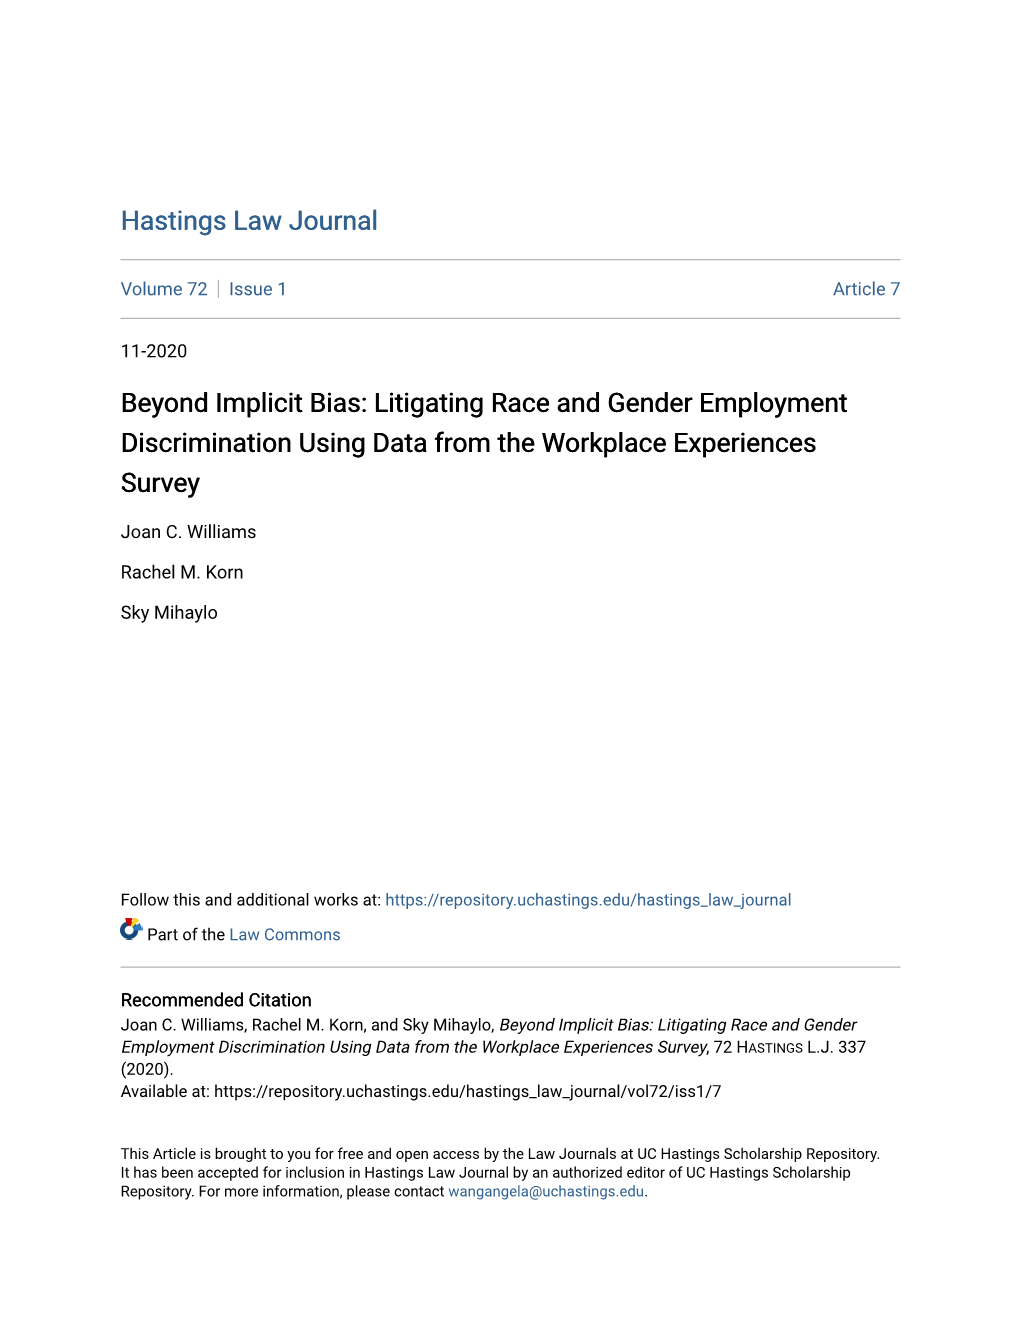 Beyond Implicit Bias: Litigating Race and Gender Employment Discrimination Using Data from the Workplace Experiences Survey